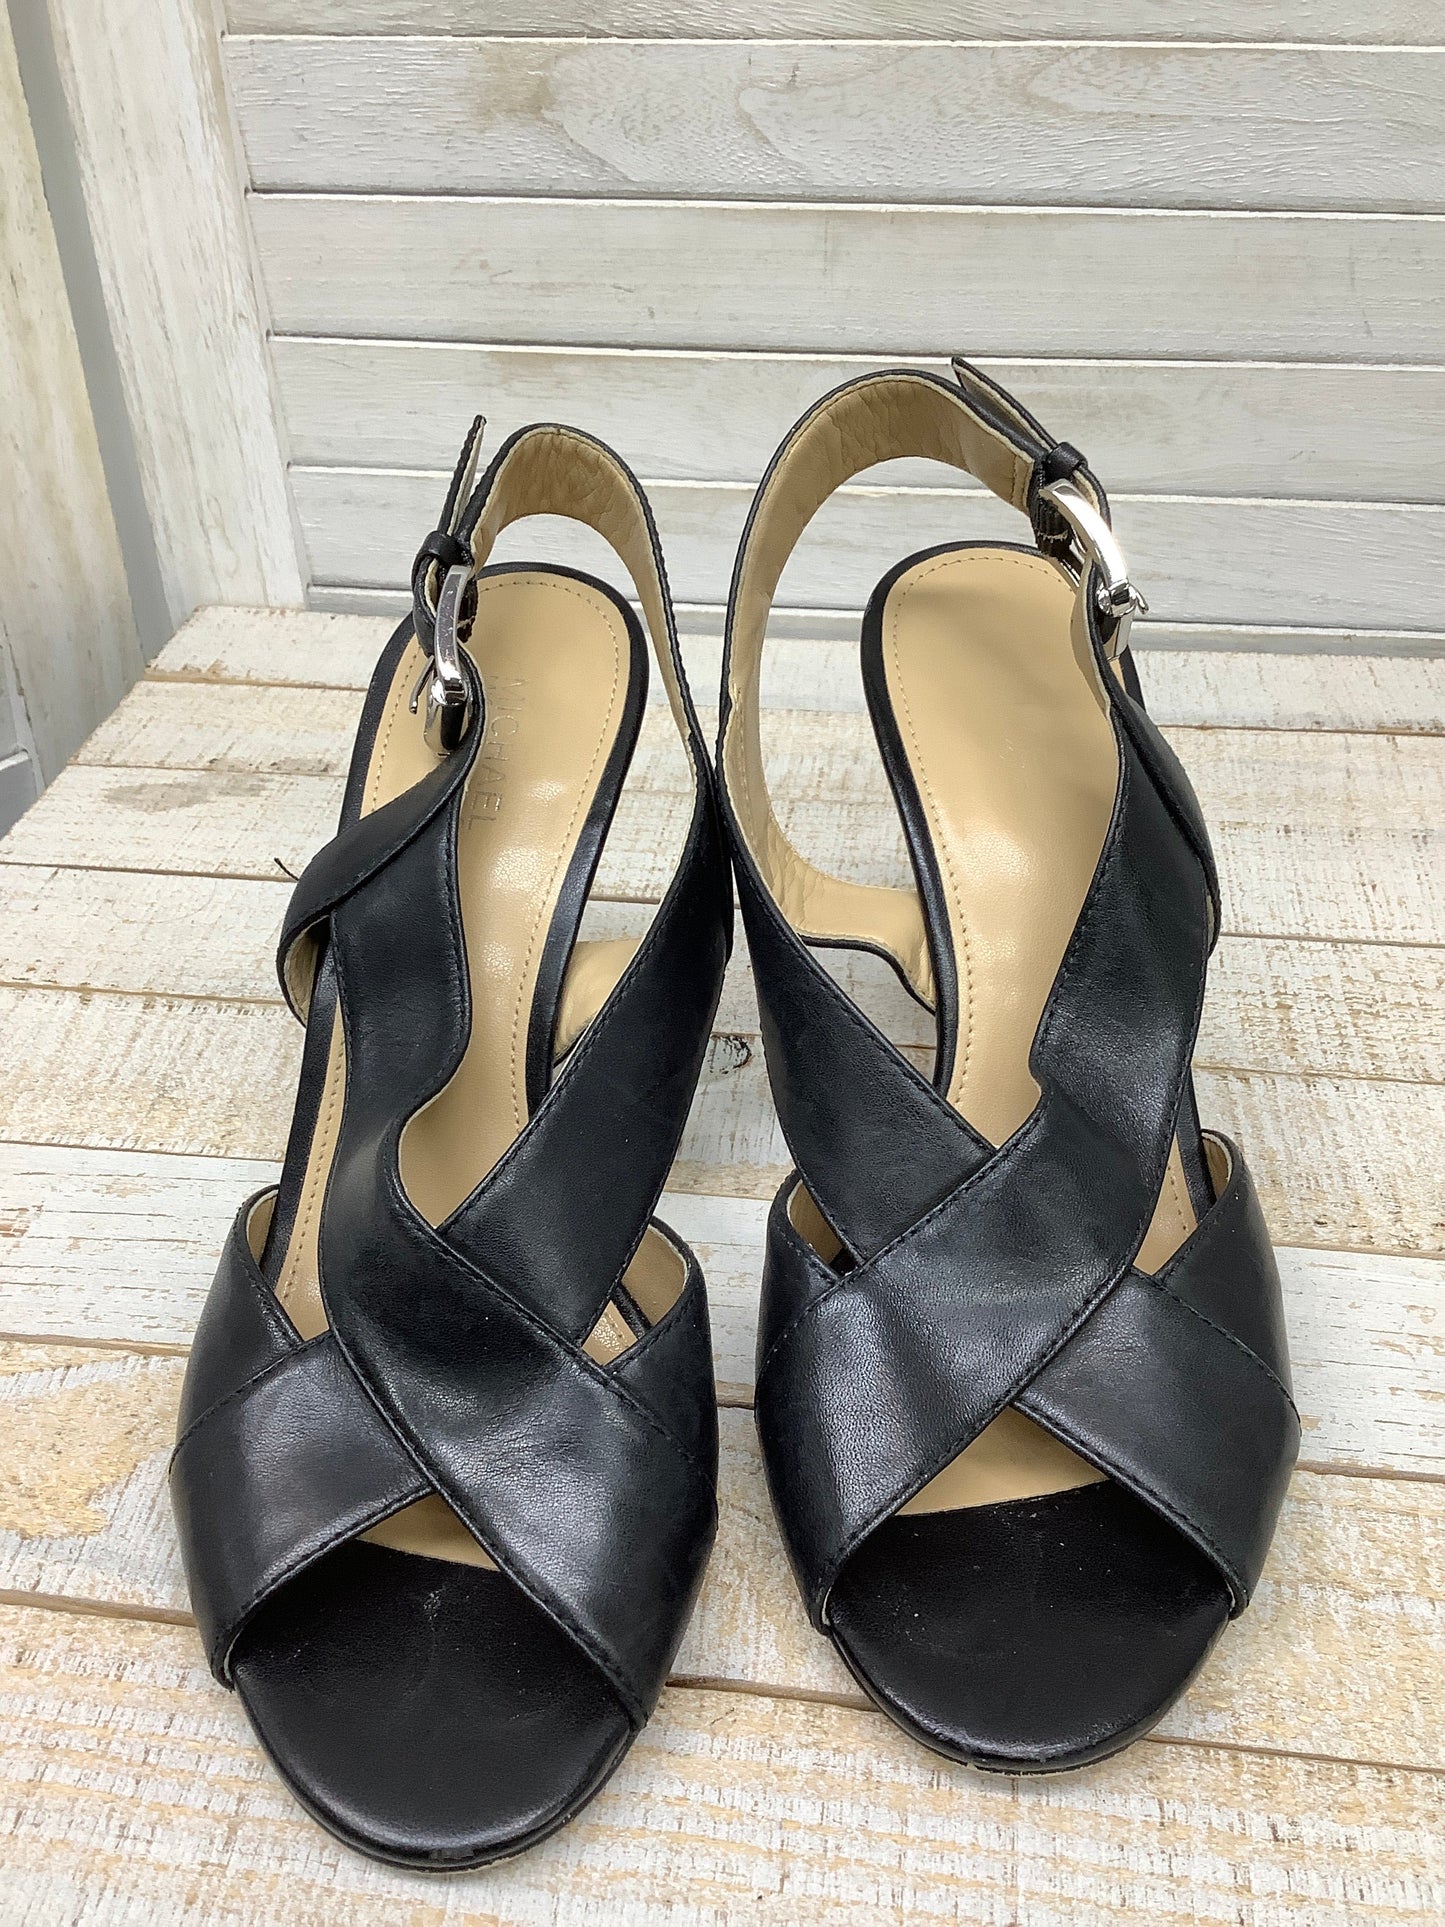 Sandals Heels Stiletto By Michael By Michael Kors  Size: 6.5